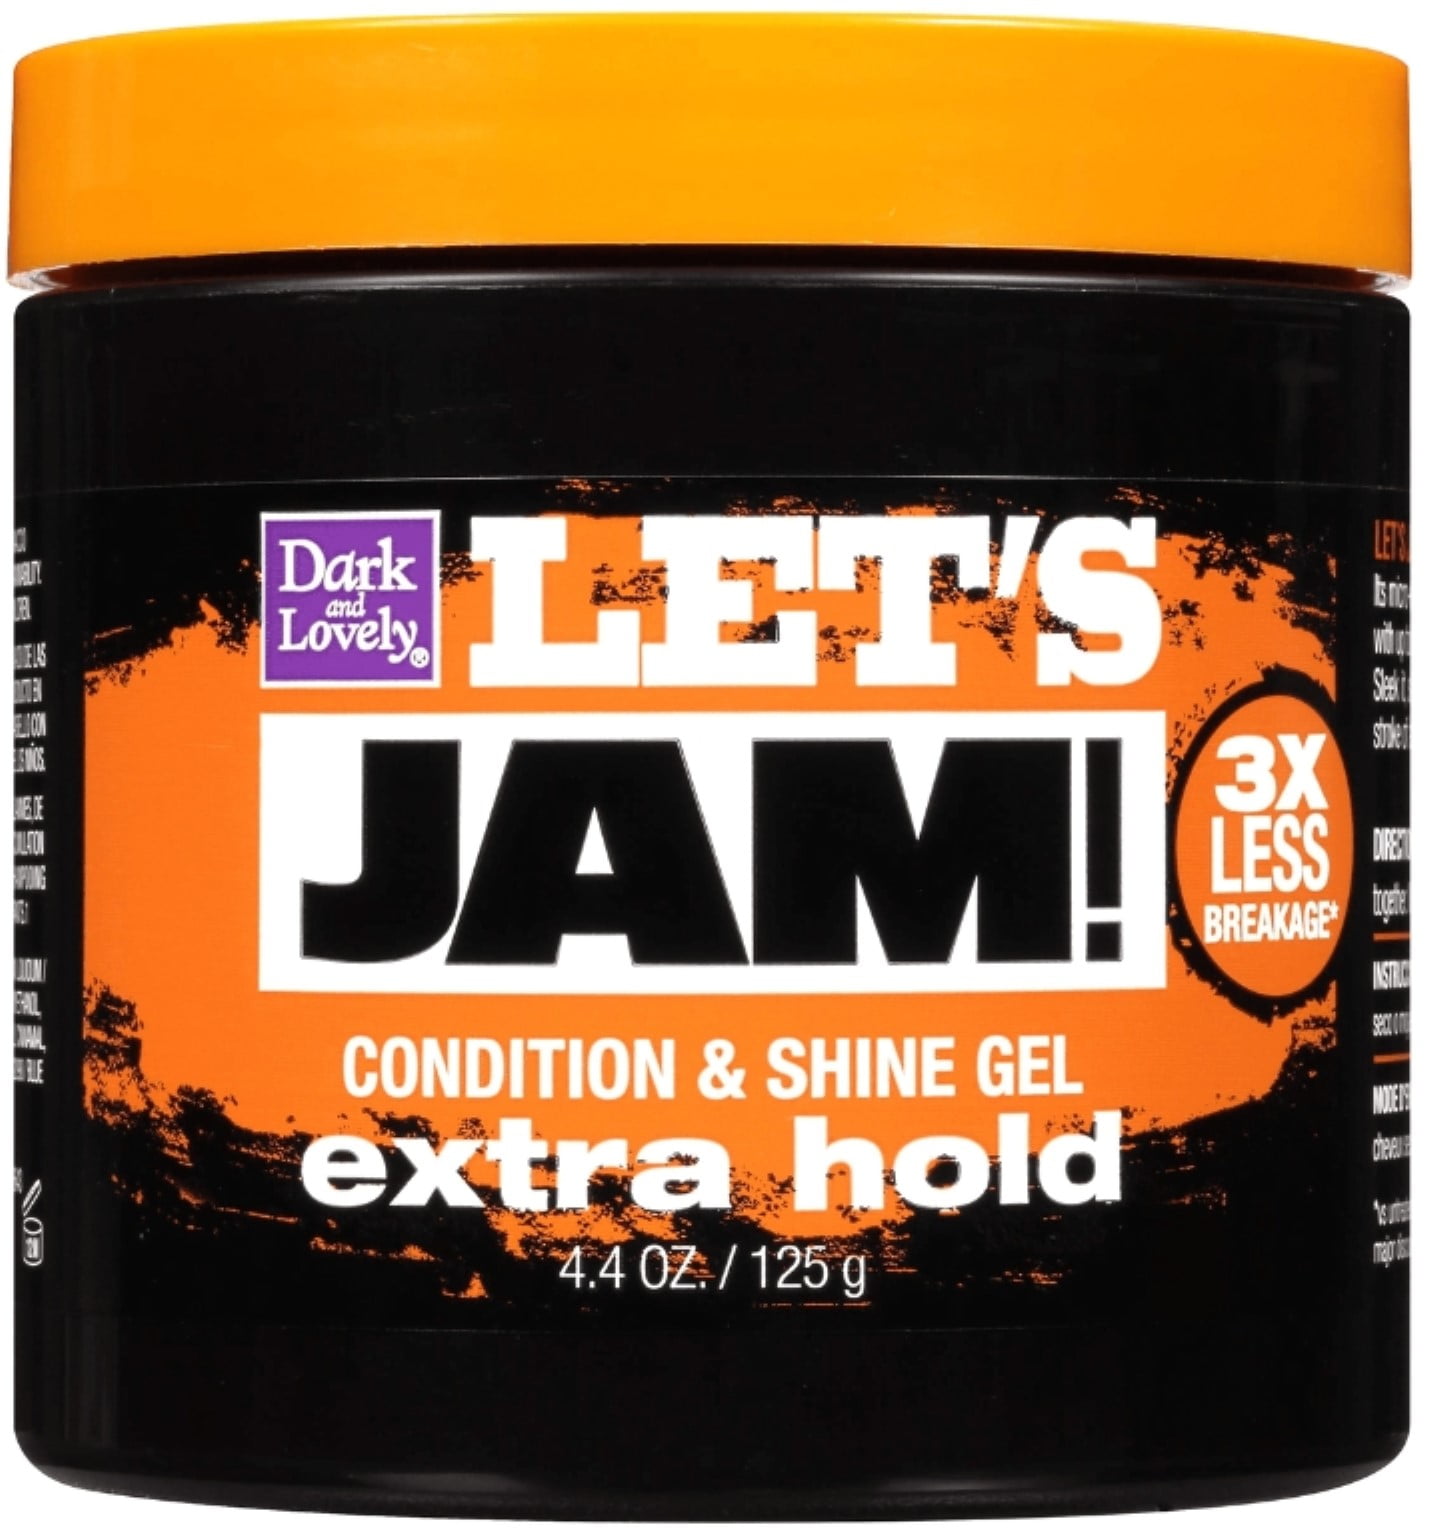 Let's Jam! Condition & Shine Gel, Extra Hold 4.40 oz (Pack of 2)